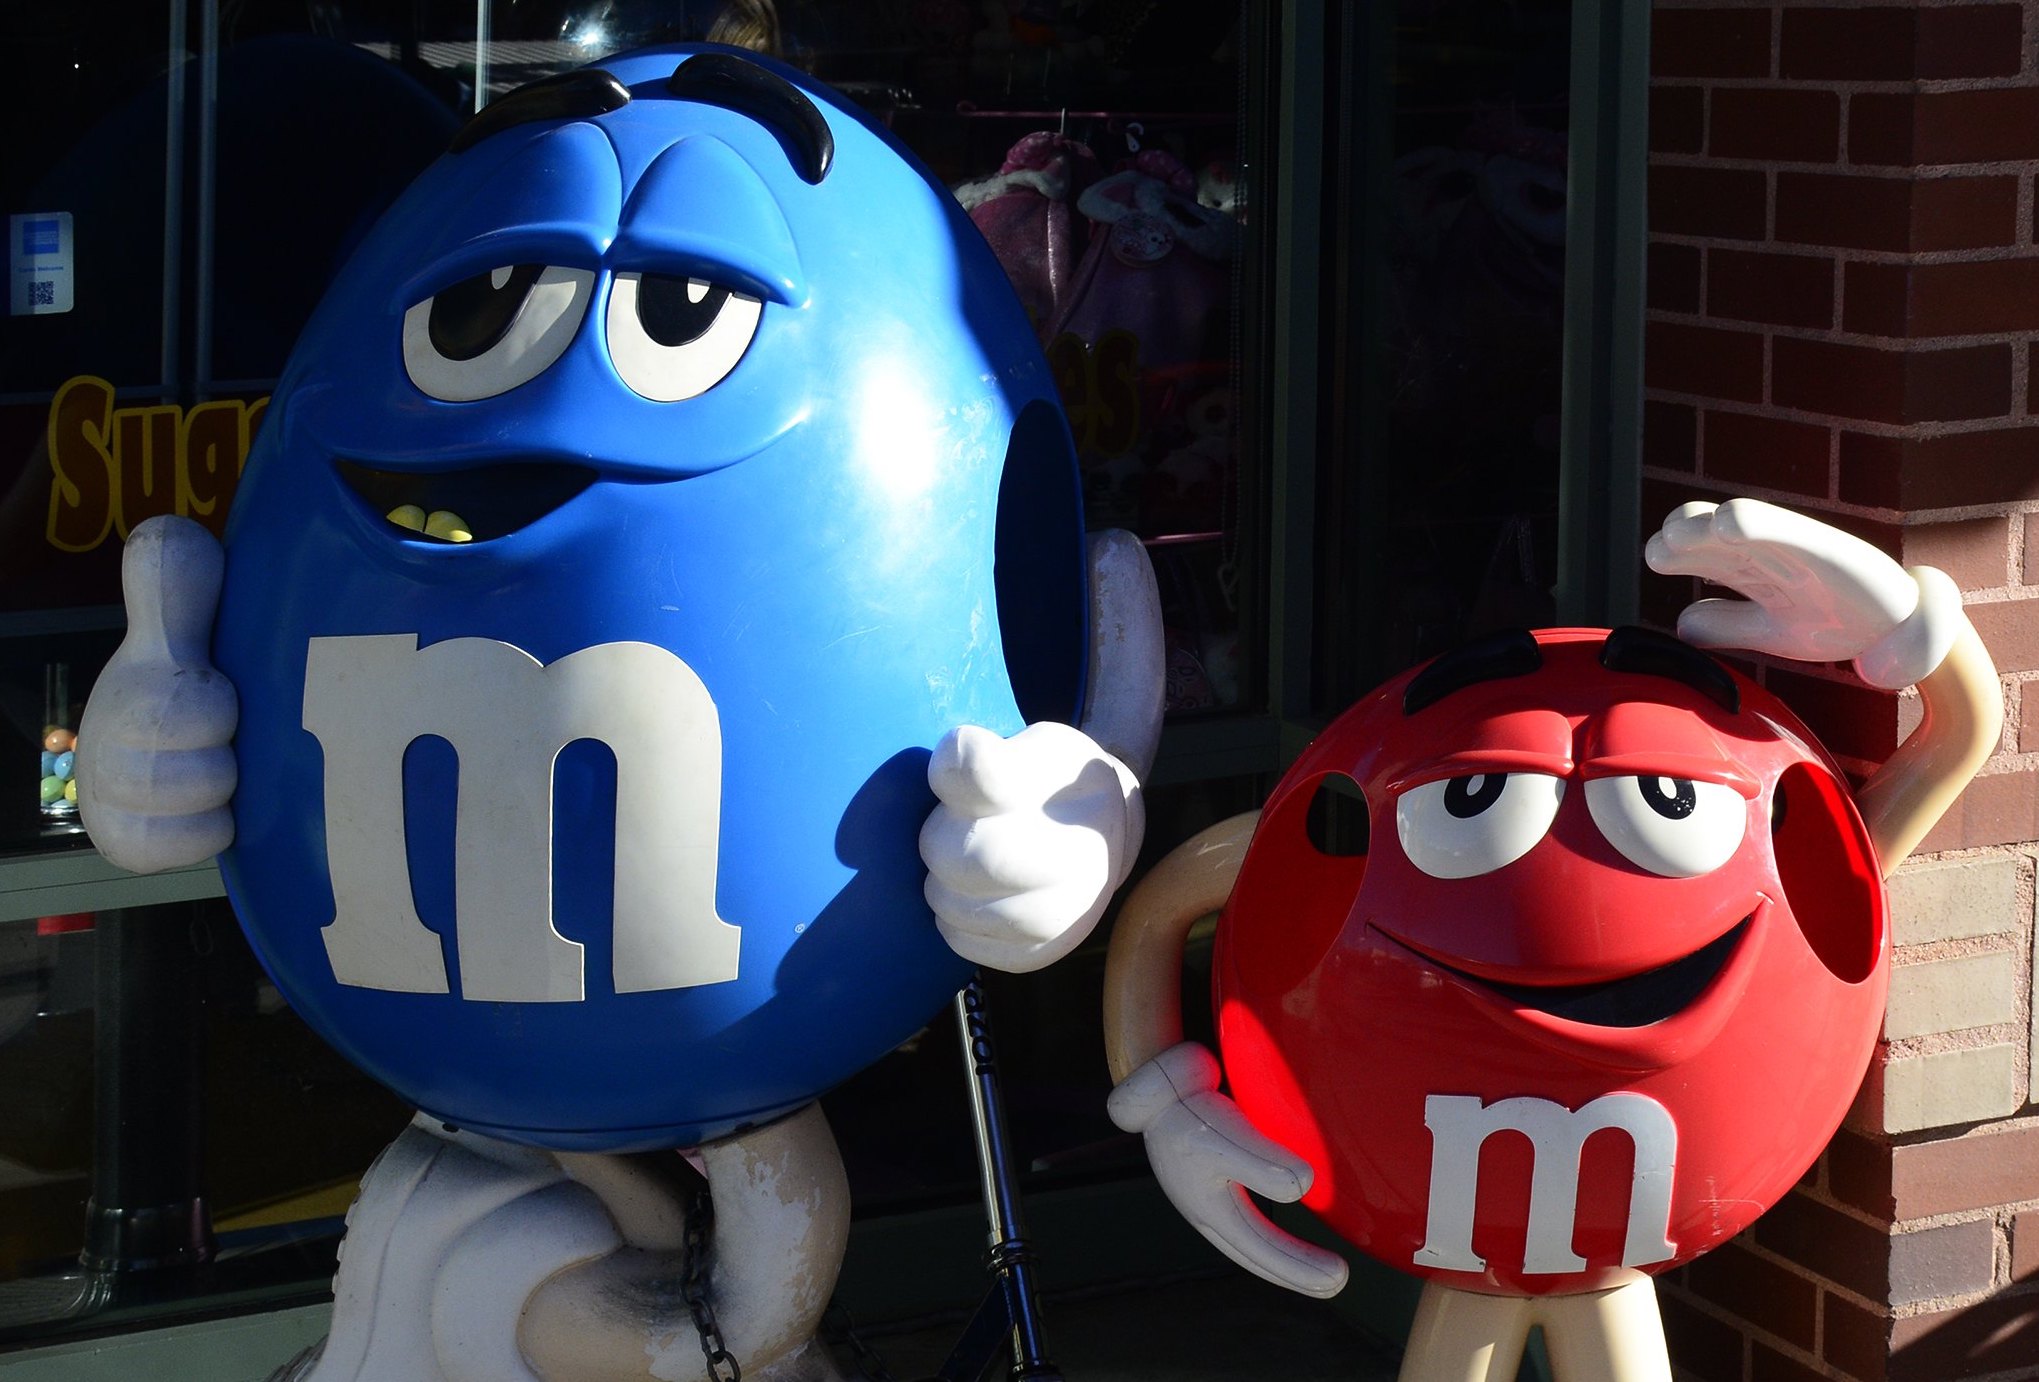 How M&M's is making the most of its spokescandies controversy